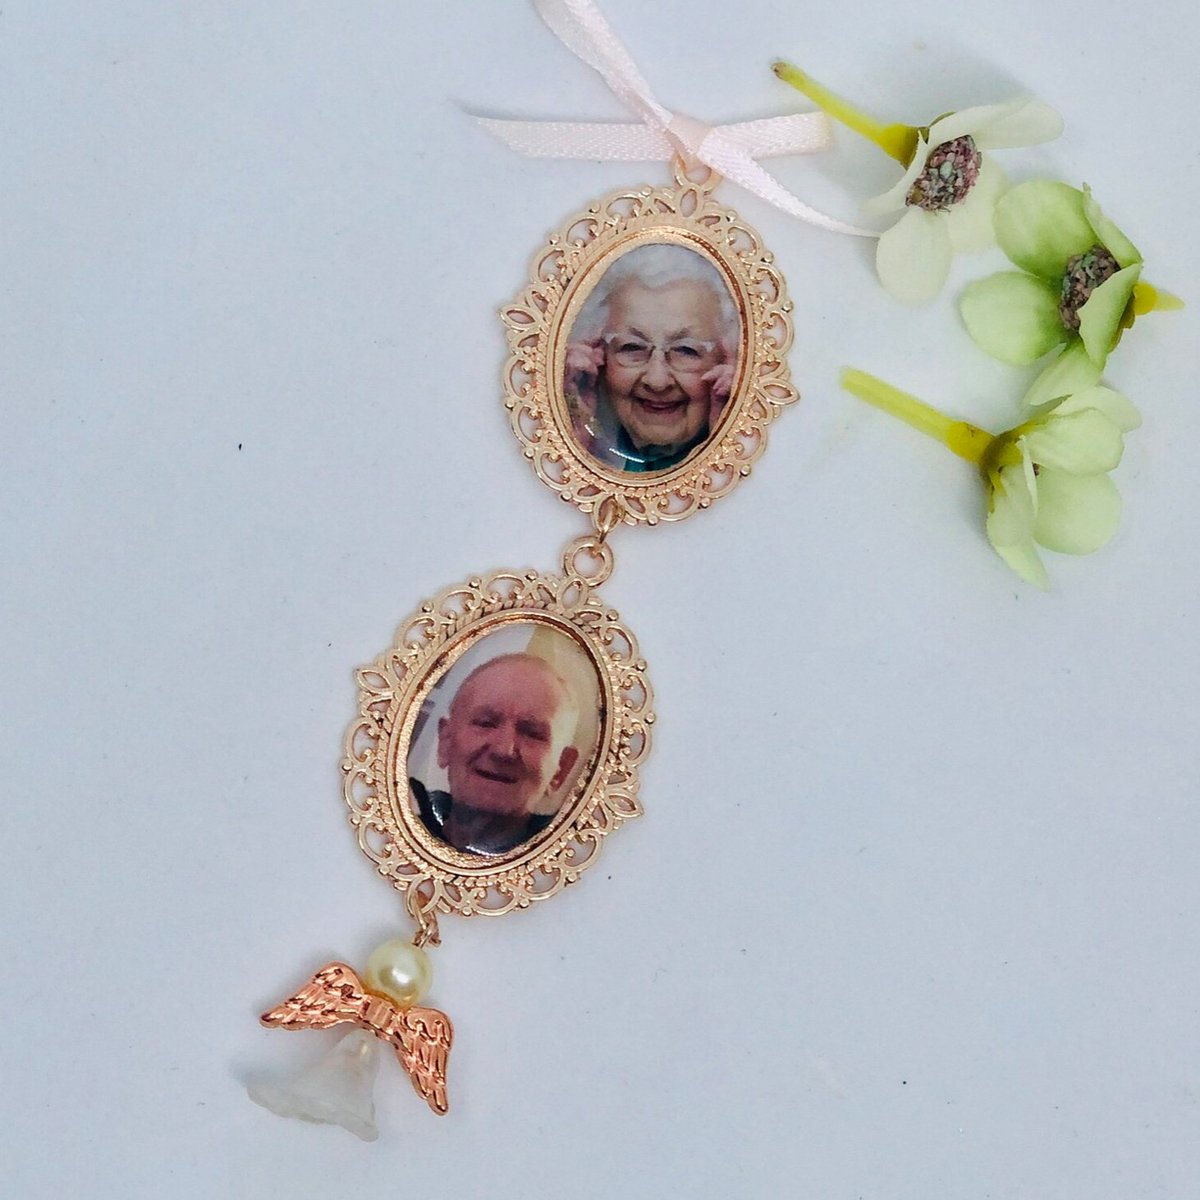 ELOISE ROSE - 2 Oval Bridal Memory Charms edged with a filagree style pattern with a beautiful Rose Gold Angel @bejewelled_bridal  #memorycharm #bouquetcharm #bridalcharm #memorialcharm #weddingcharm #picturecharm #bridalphotocharm